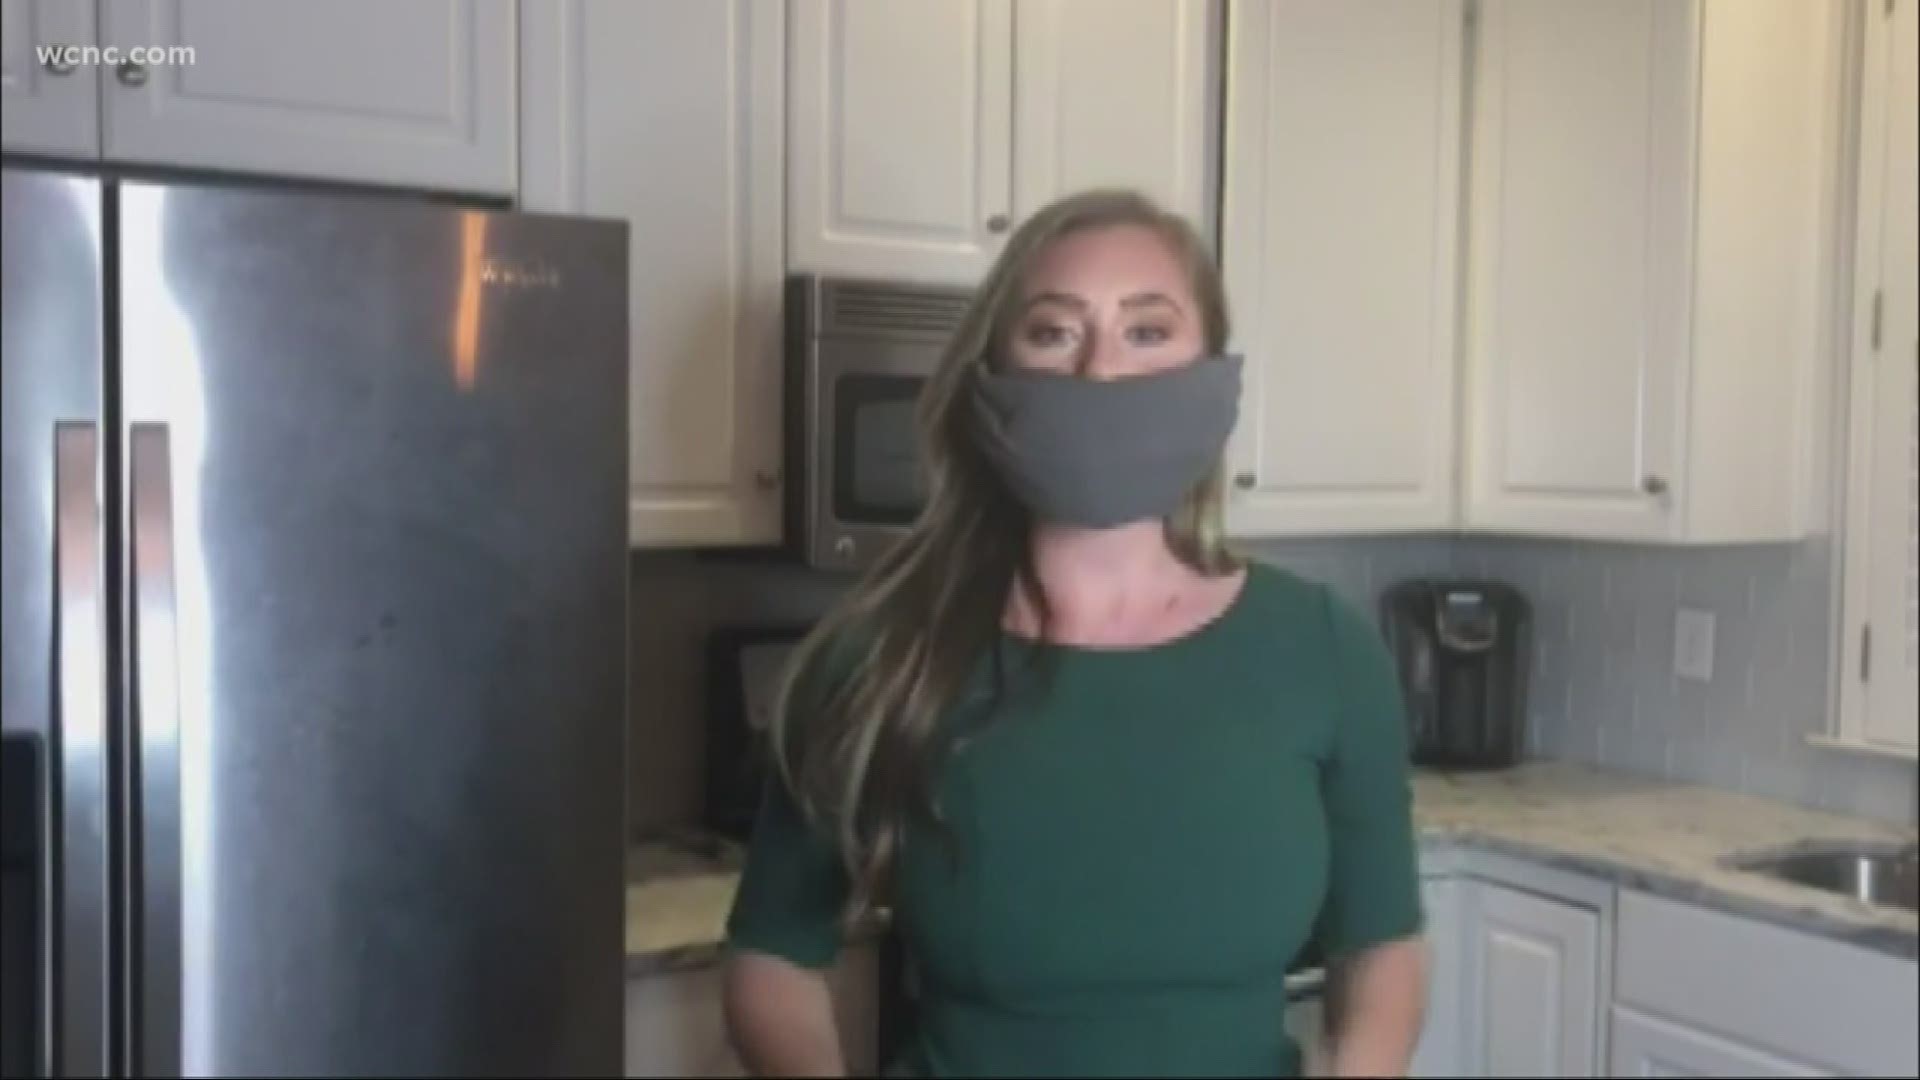 Here are some easy-to-follow instructions on how to make a face mask to help combat the spread of coronavirus.